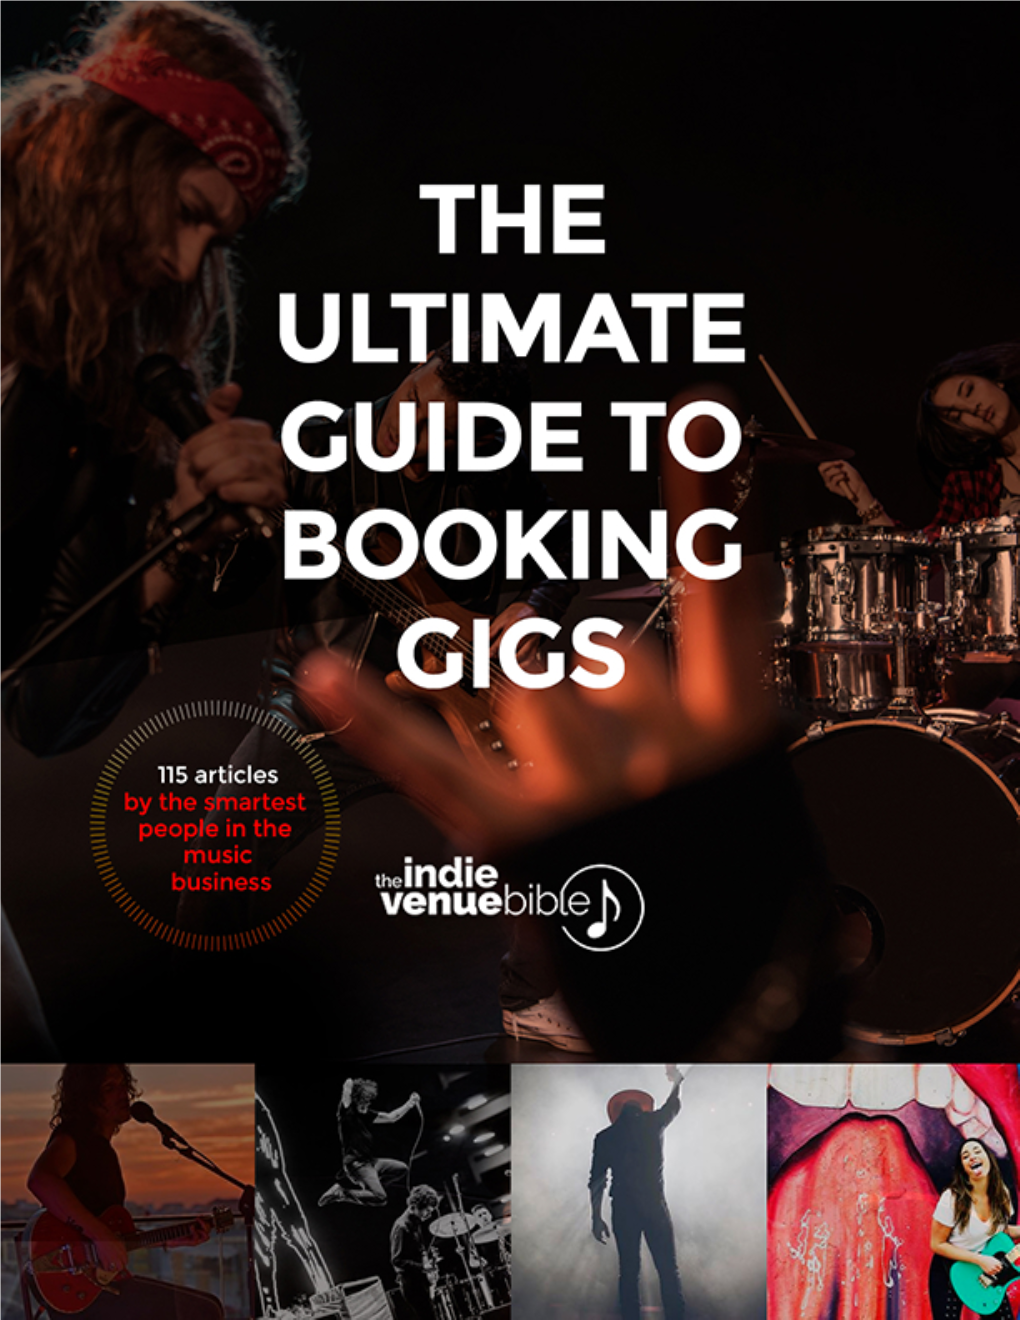 4. Booking Gigs